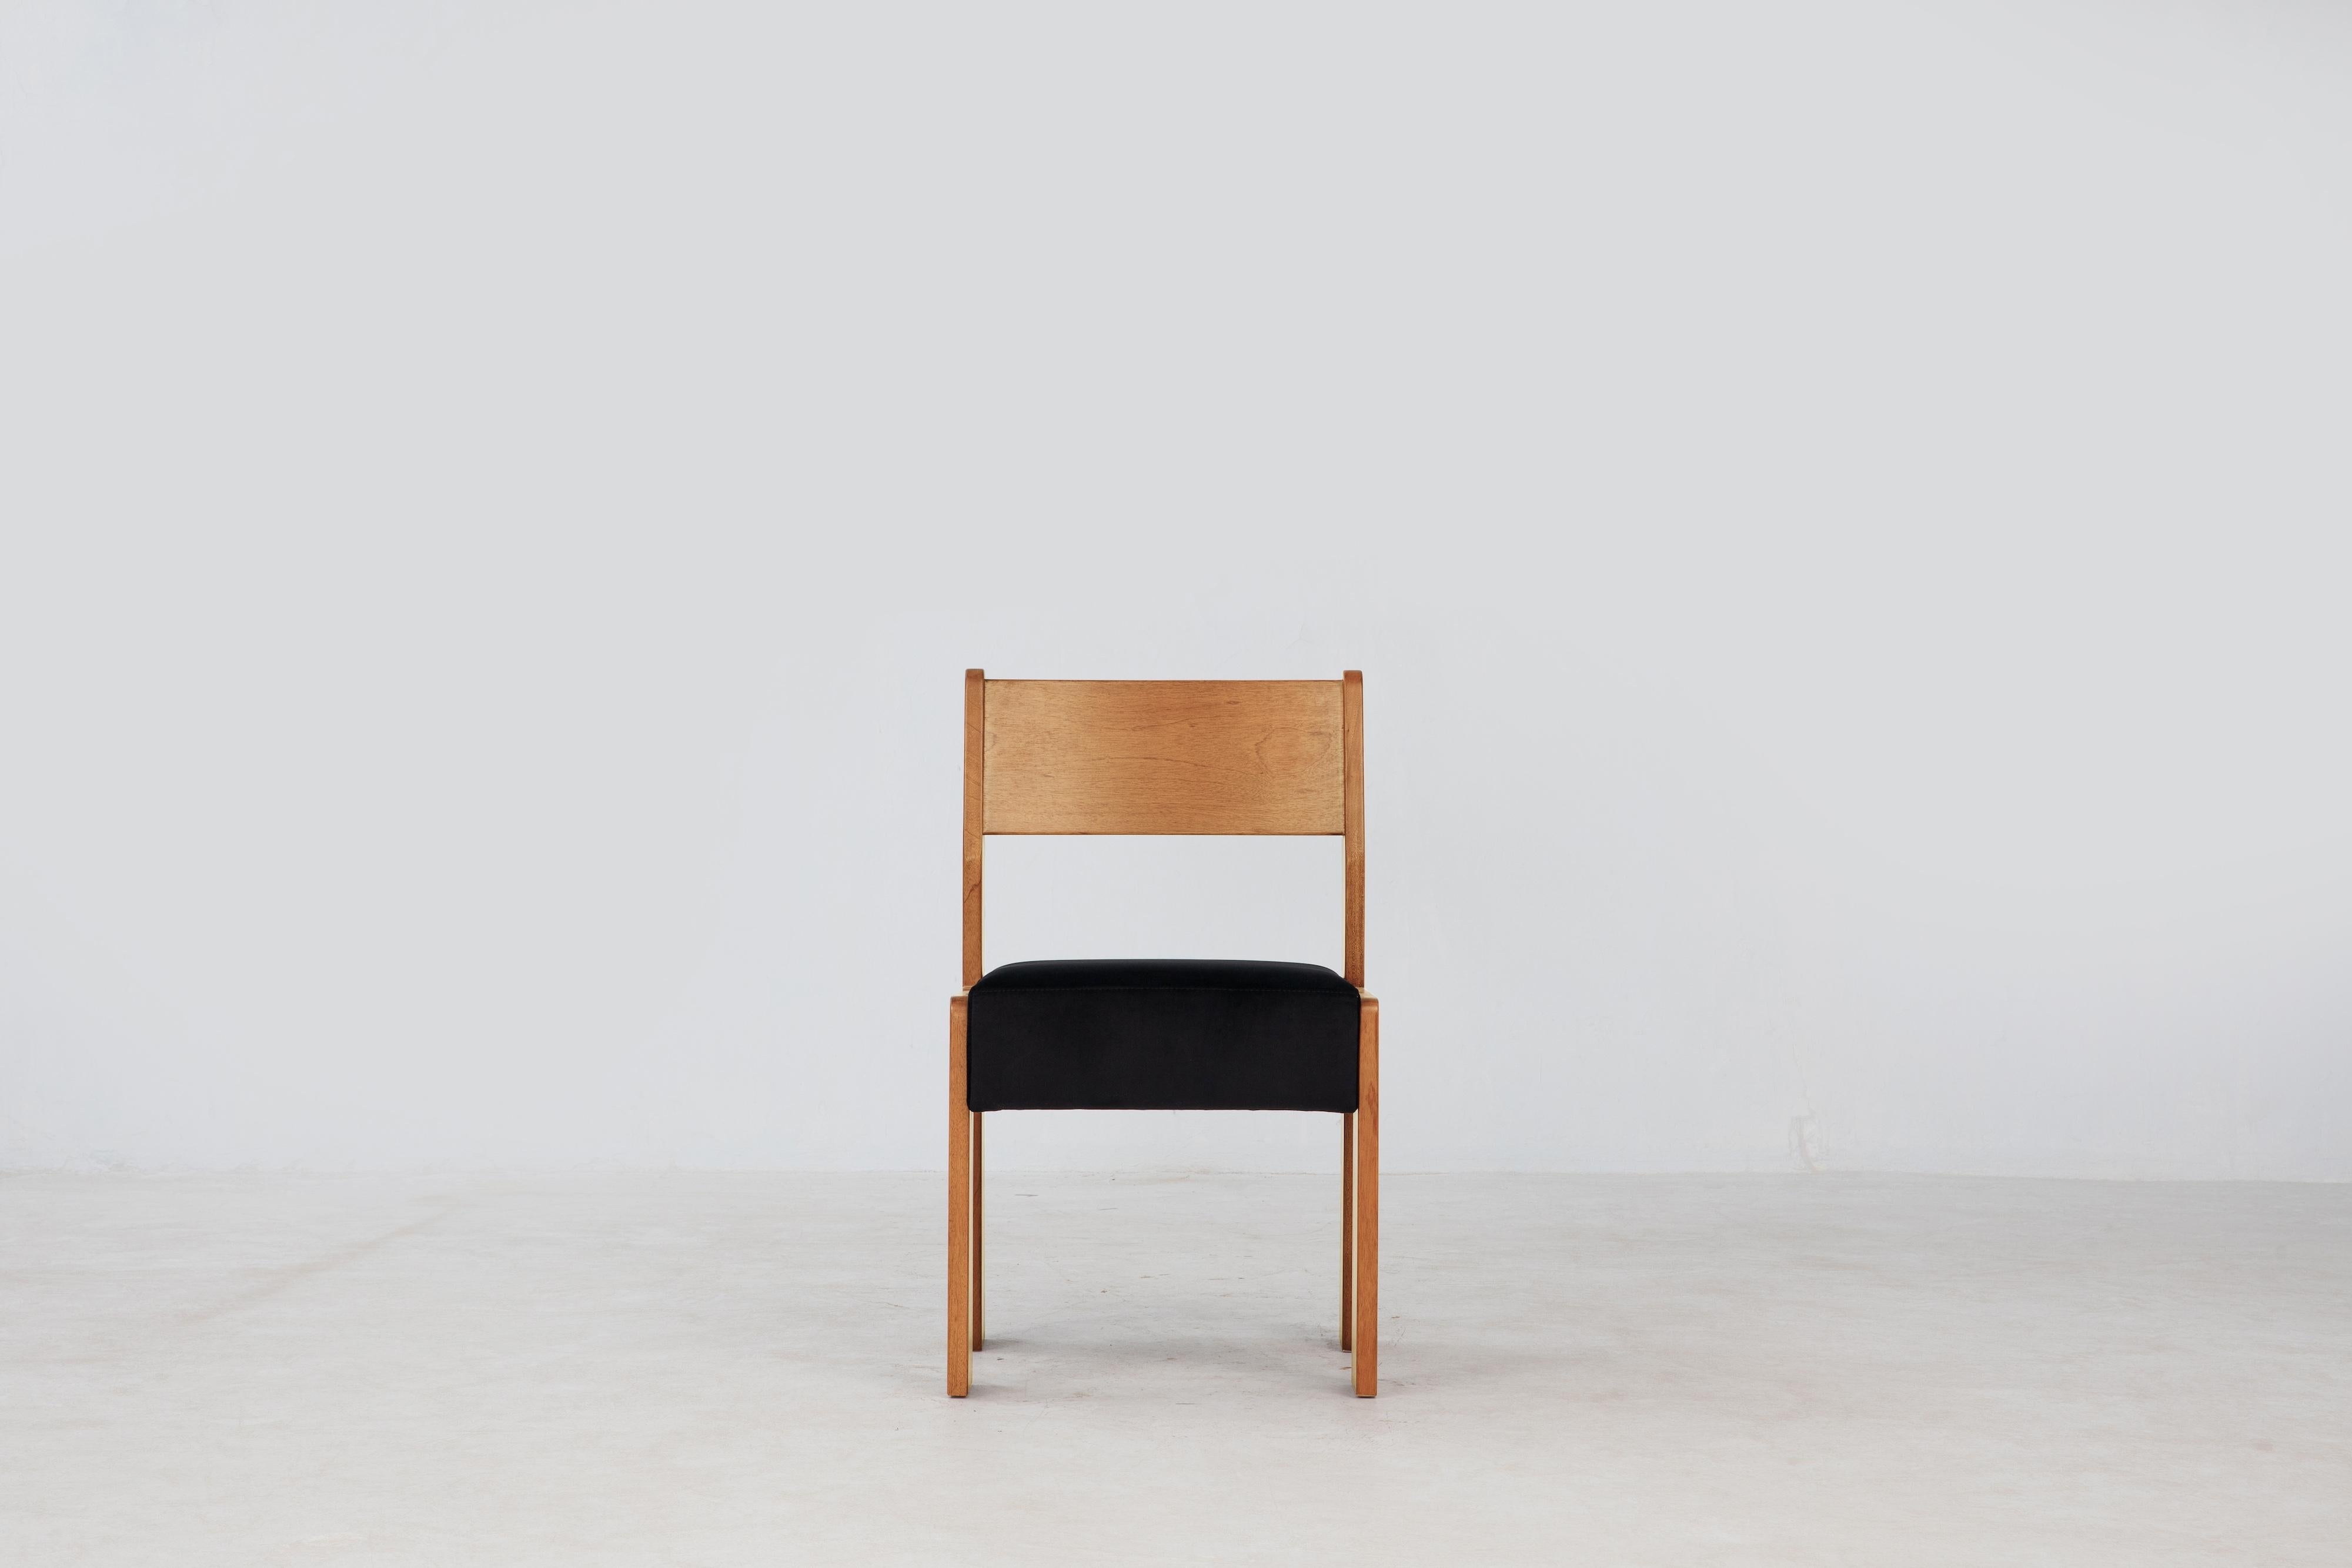 The Reka Side Chair spotlights contrasting width. In designing the chair, we played with wide and narrow, thick and thin: the legs are wide and flat along one axis, thin along the other, while the seat cushion was elongated and fattened vertically.